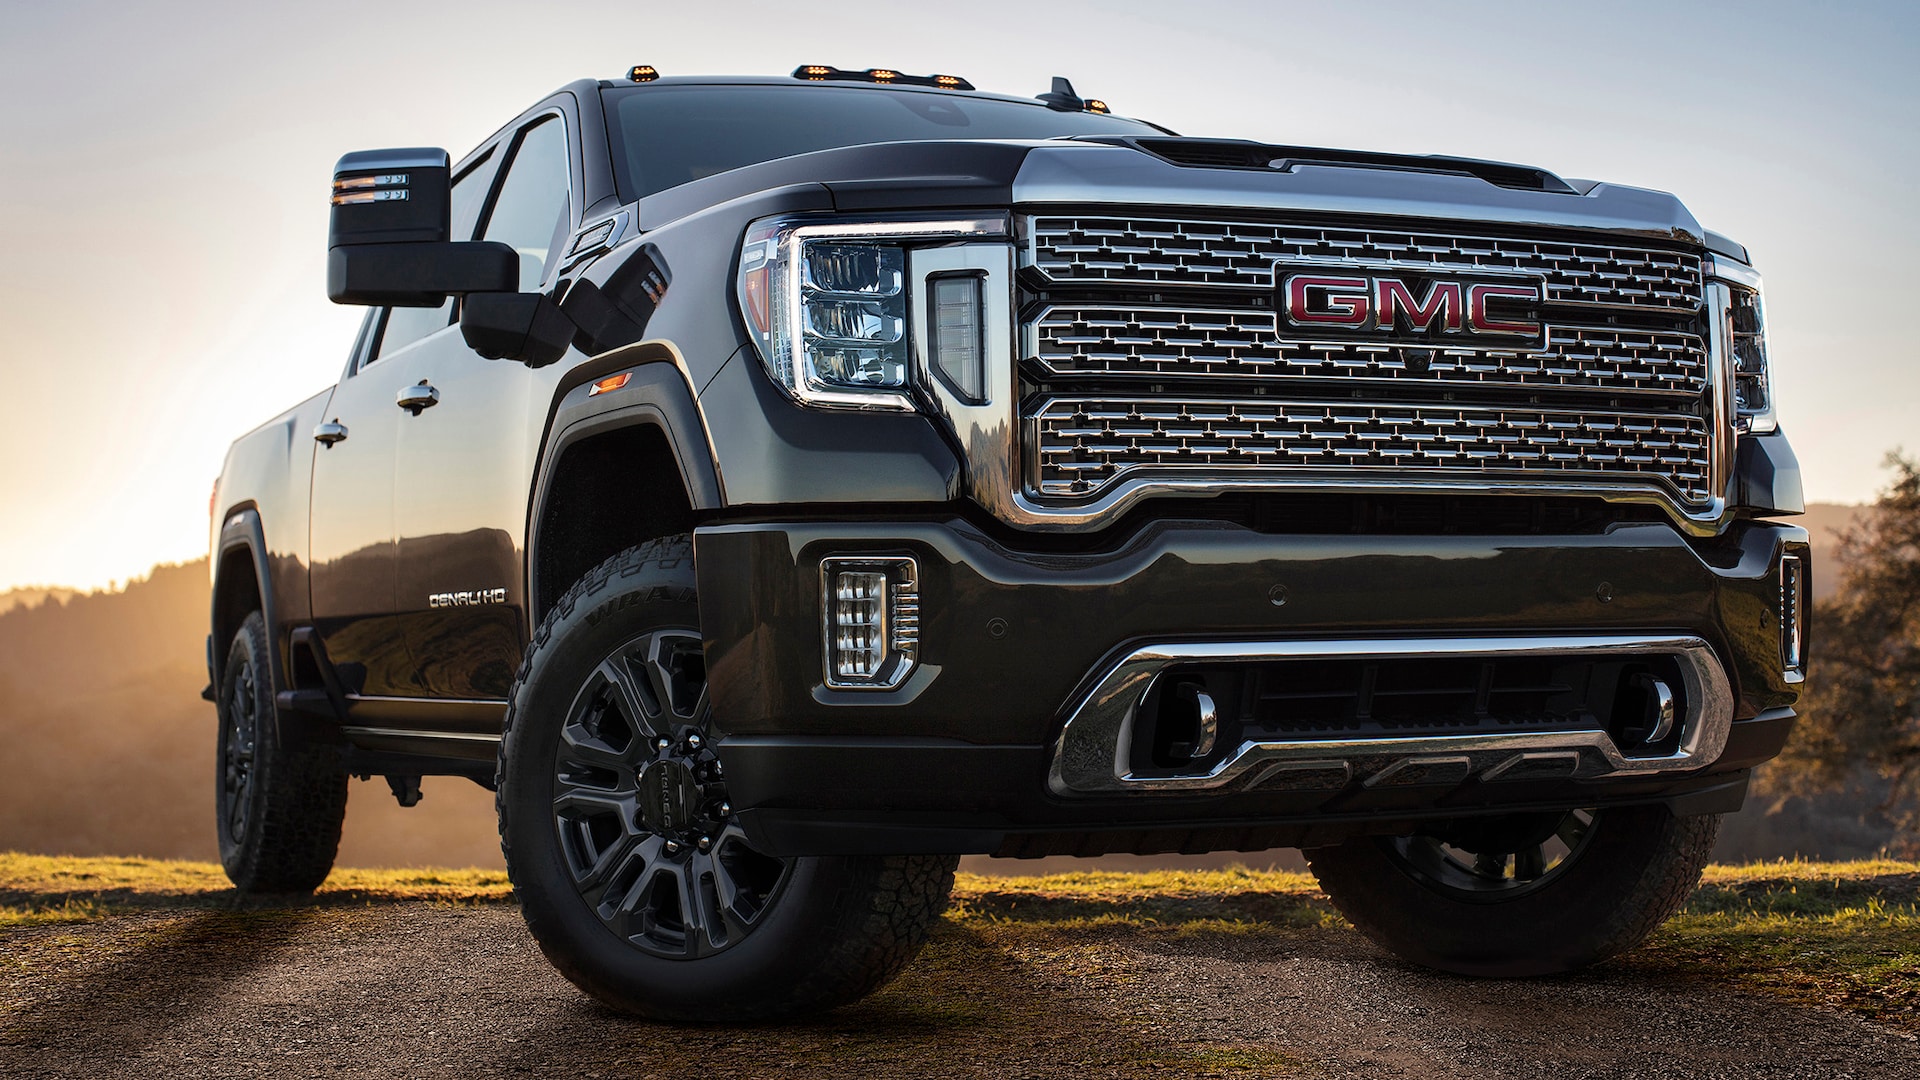 2022 GMC Sierra 2500HD Prices, Reviews, and Photos - MotorTrend